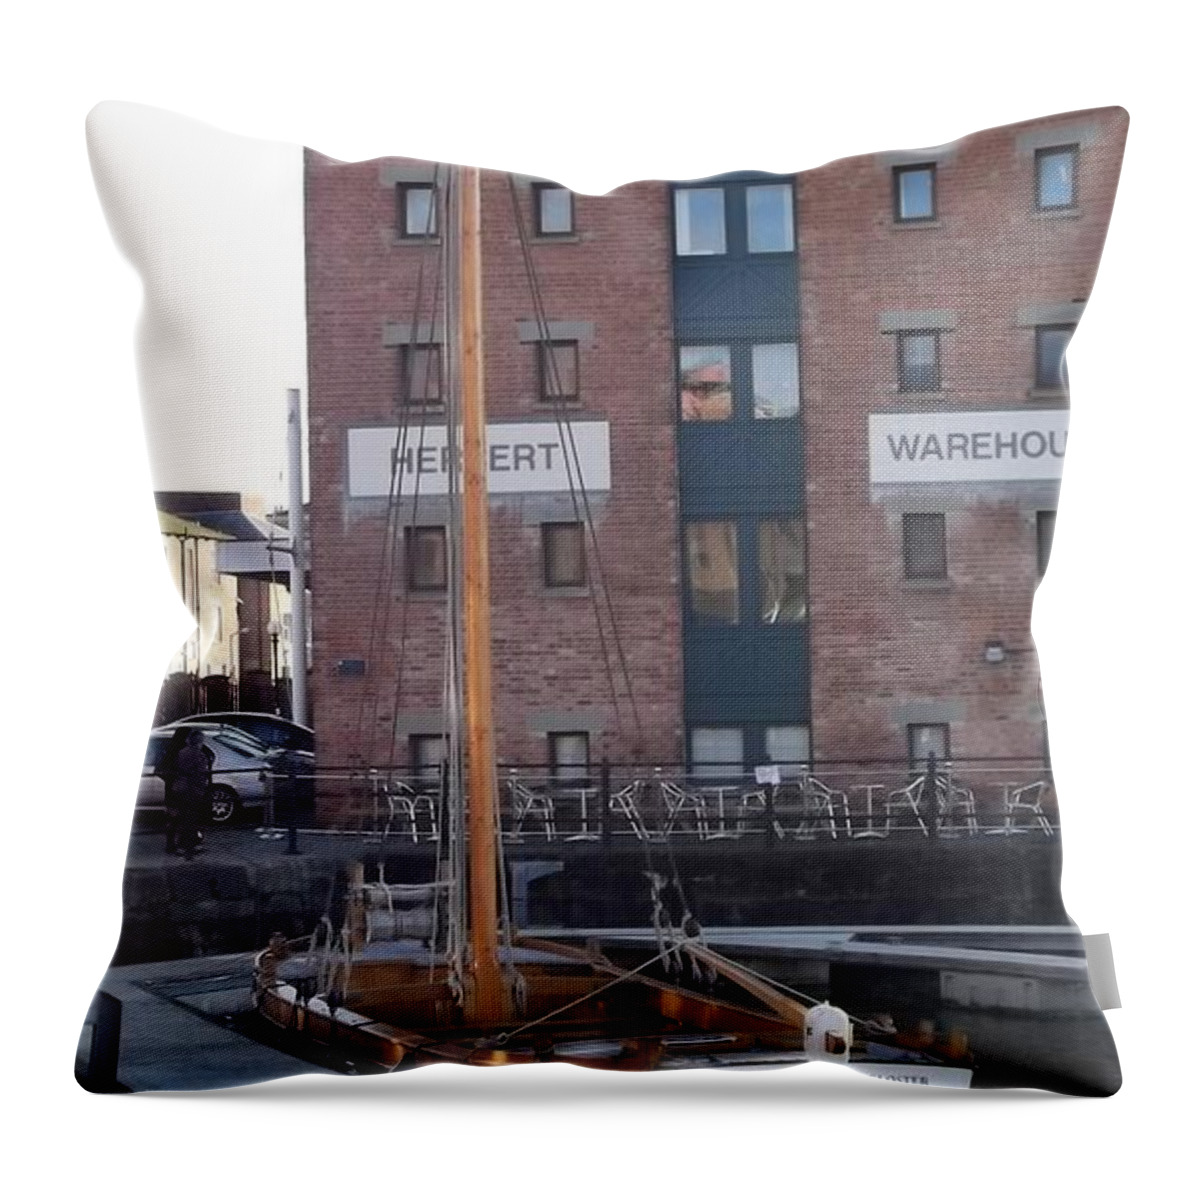 The Hereford Bull Throw Pillow featuring the photograph The Hereford Bull by John Williams